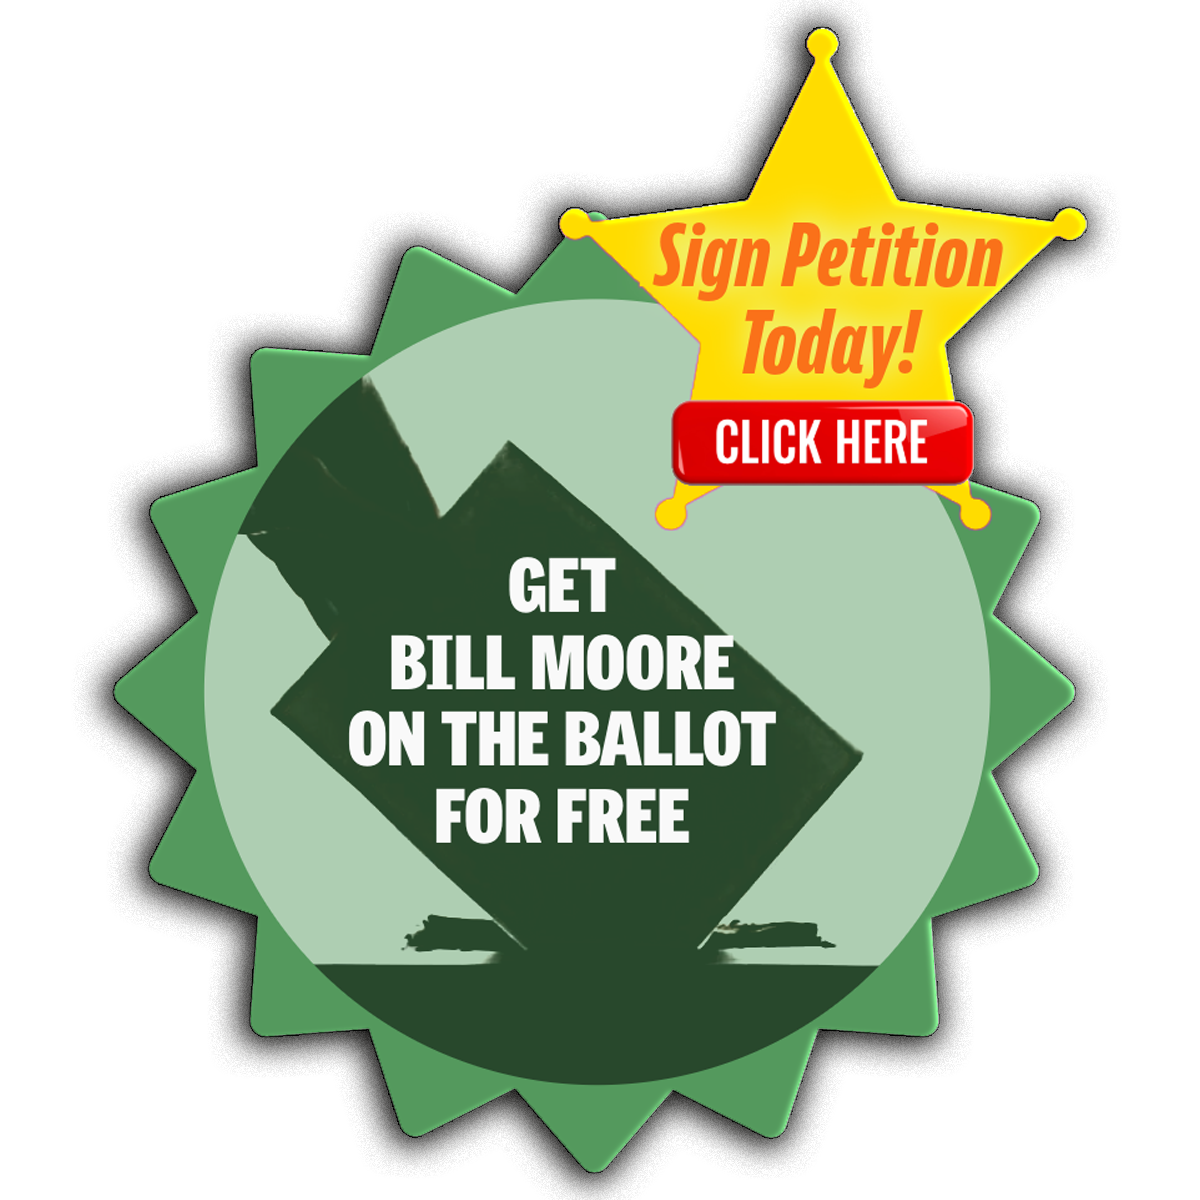 Sign Petition for Bill Moore to be on ballot as Sheriff Candidate